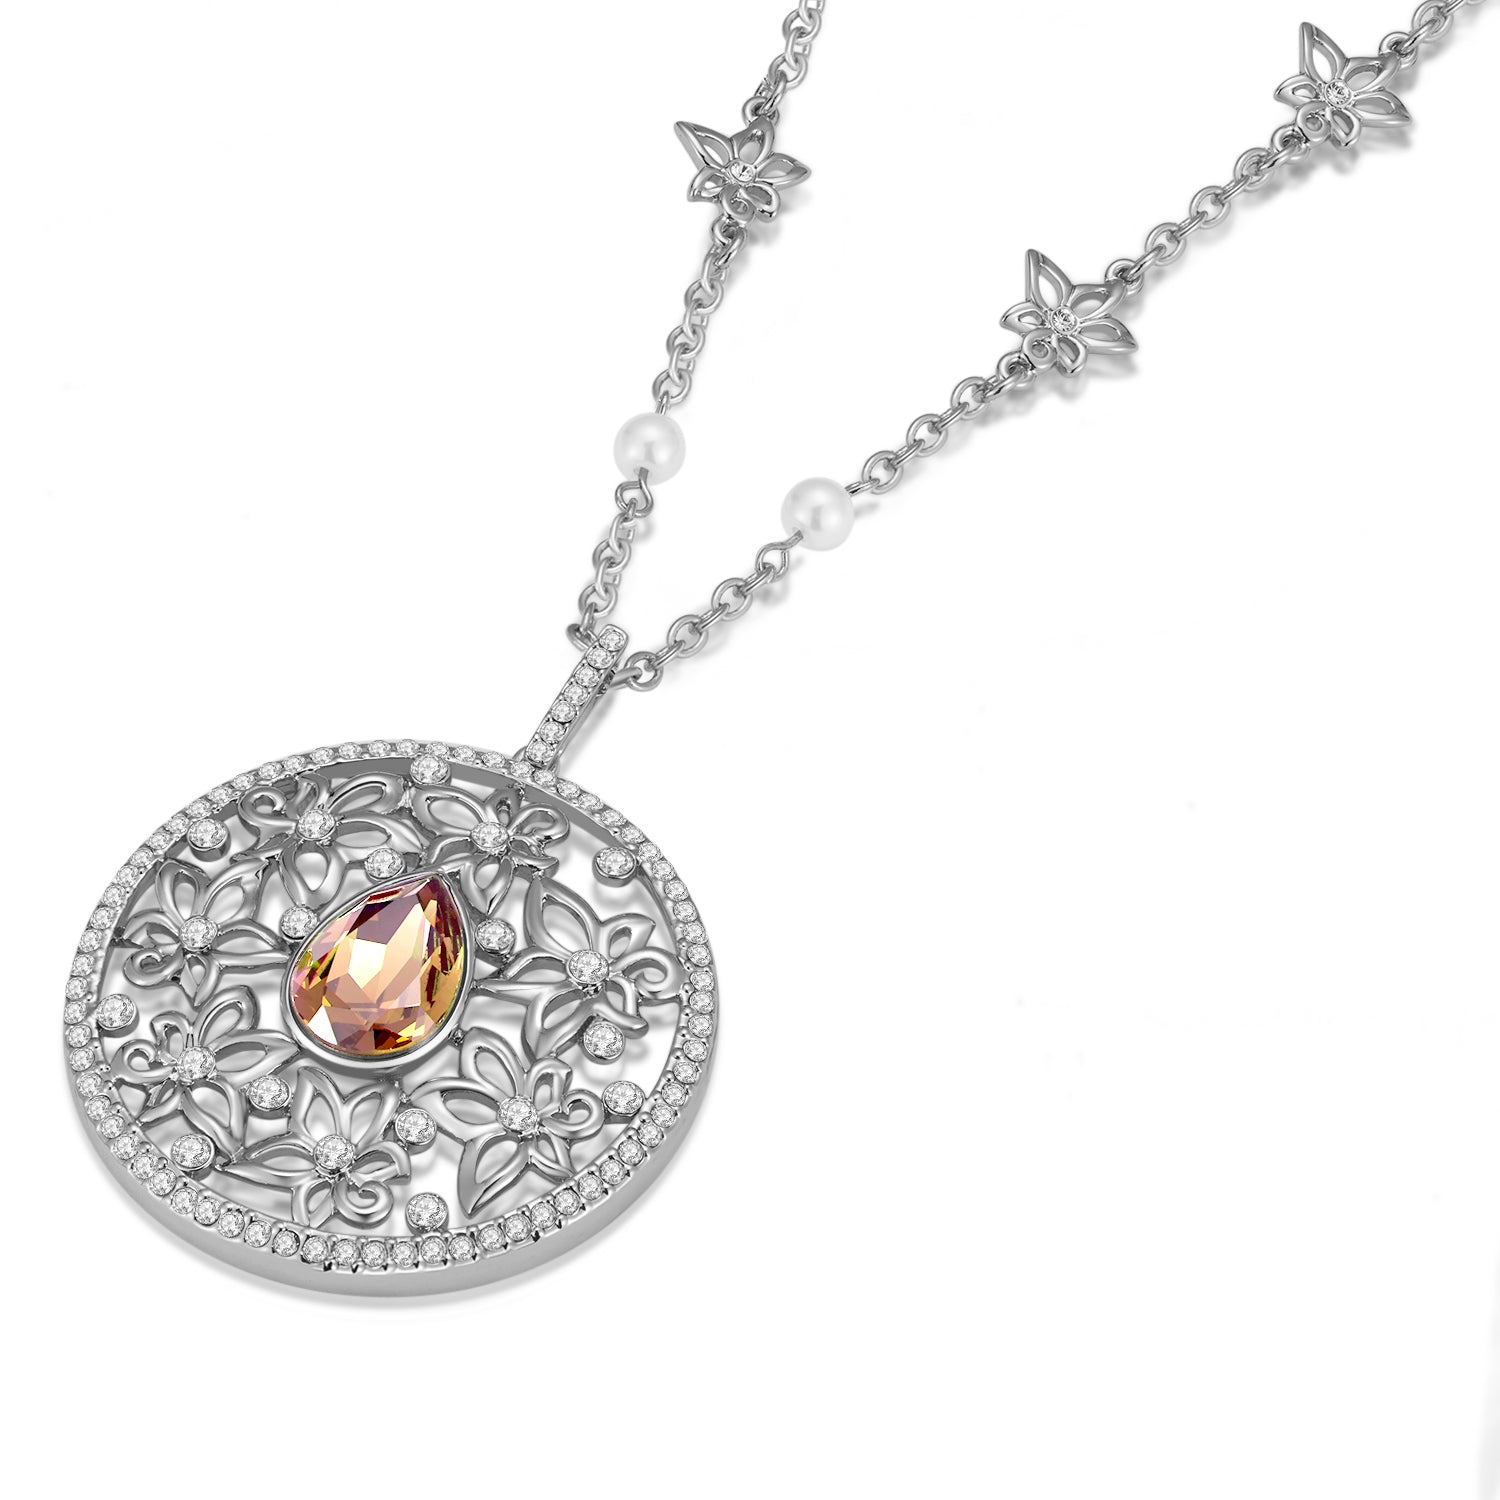 VICACCI Delicate Riches and honour flowers, Embellished with crystals from Swarovski